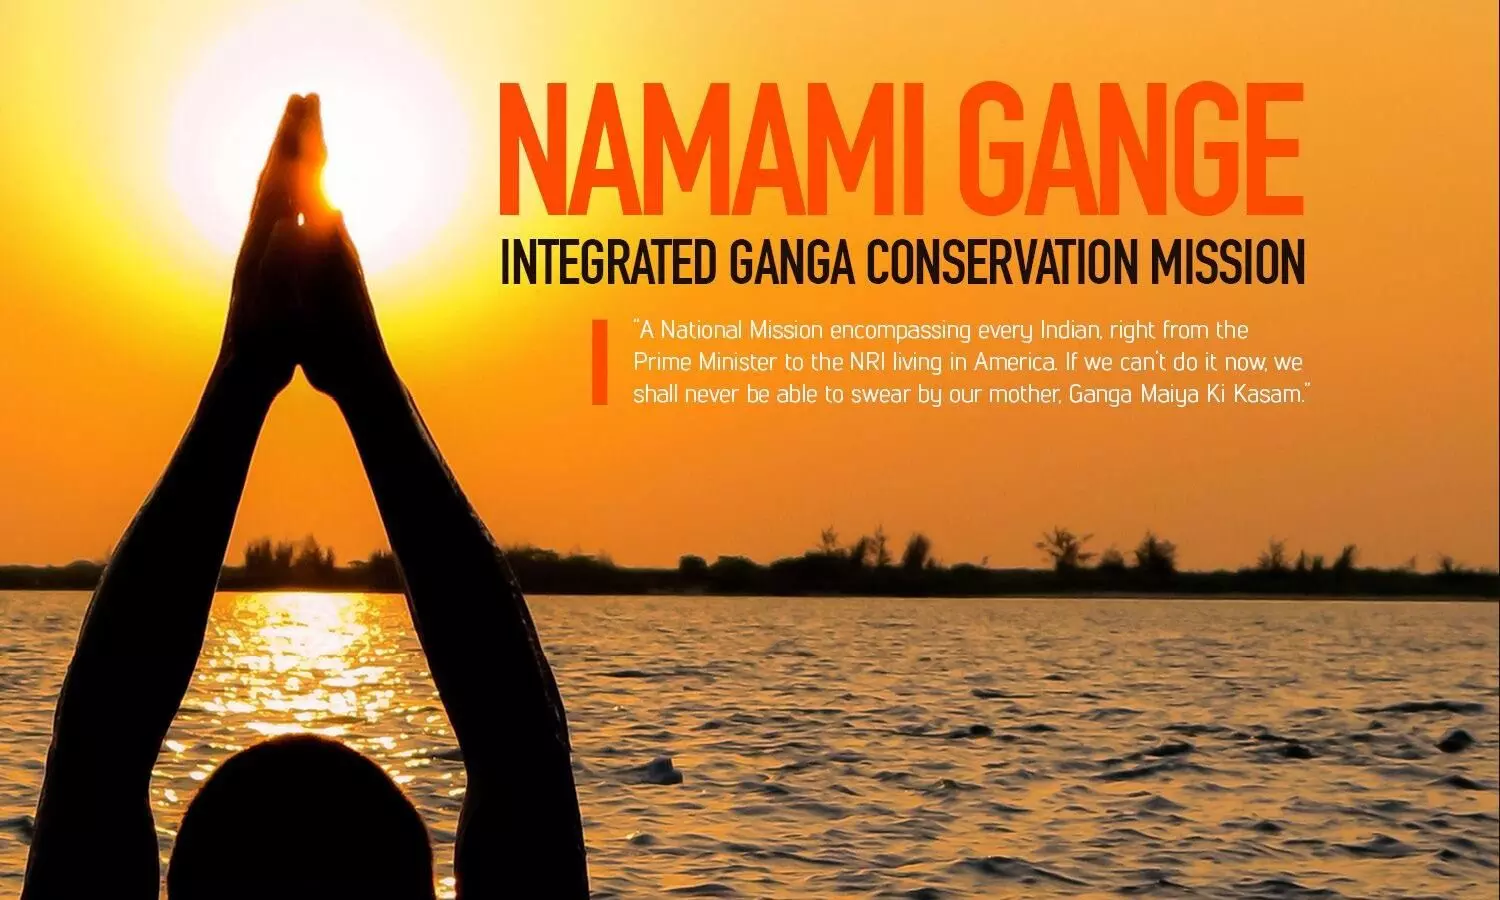 UP to become first state in India to include Ganga conservation as part of school syllabus